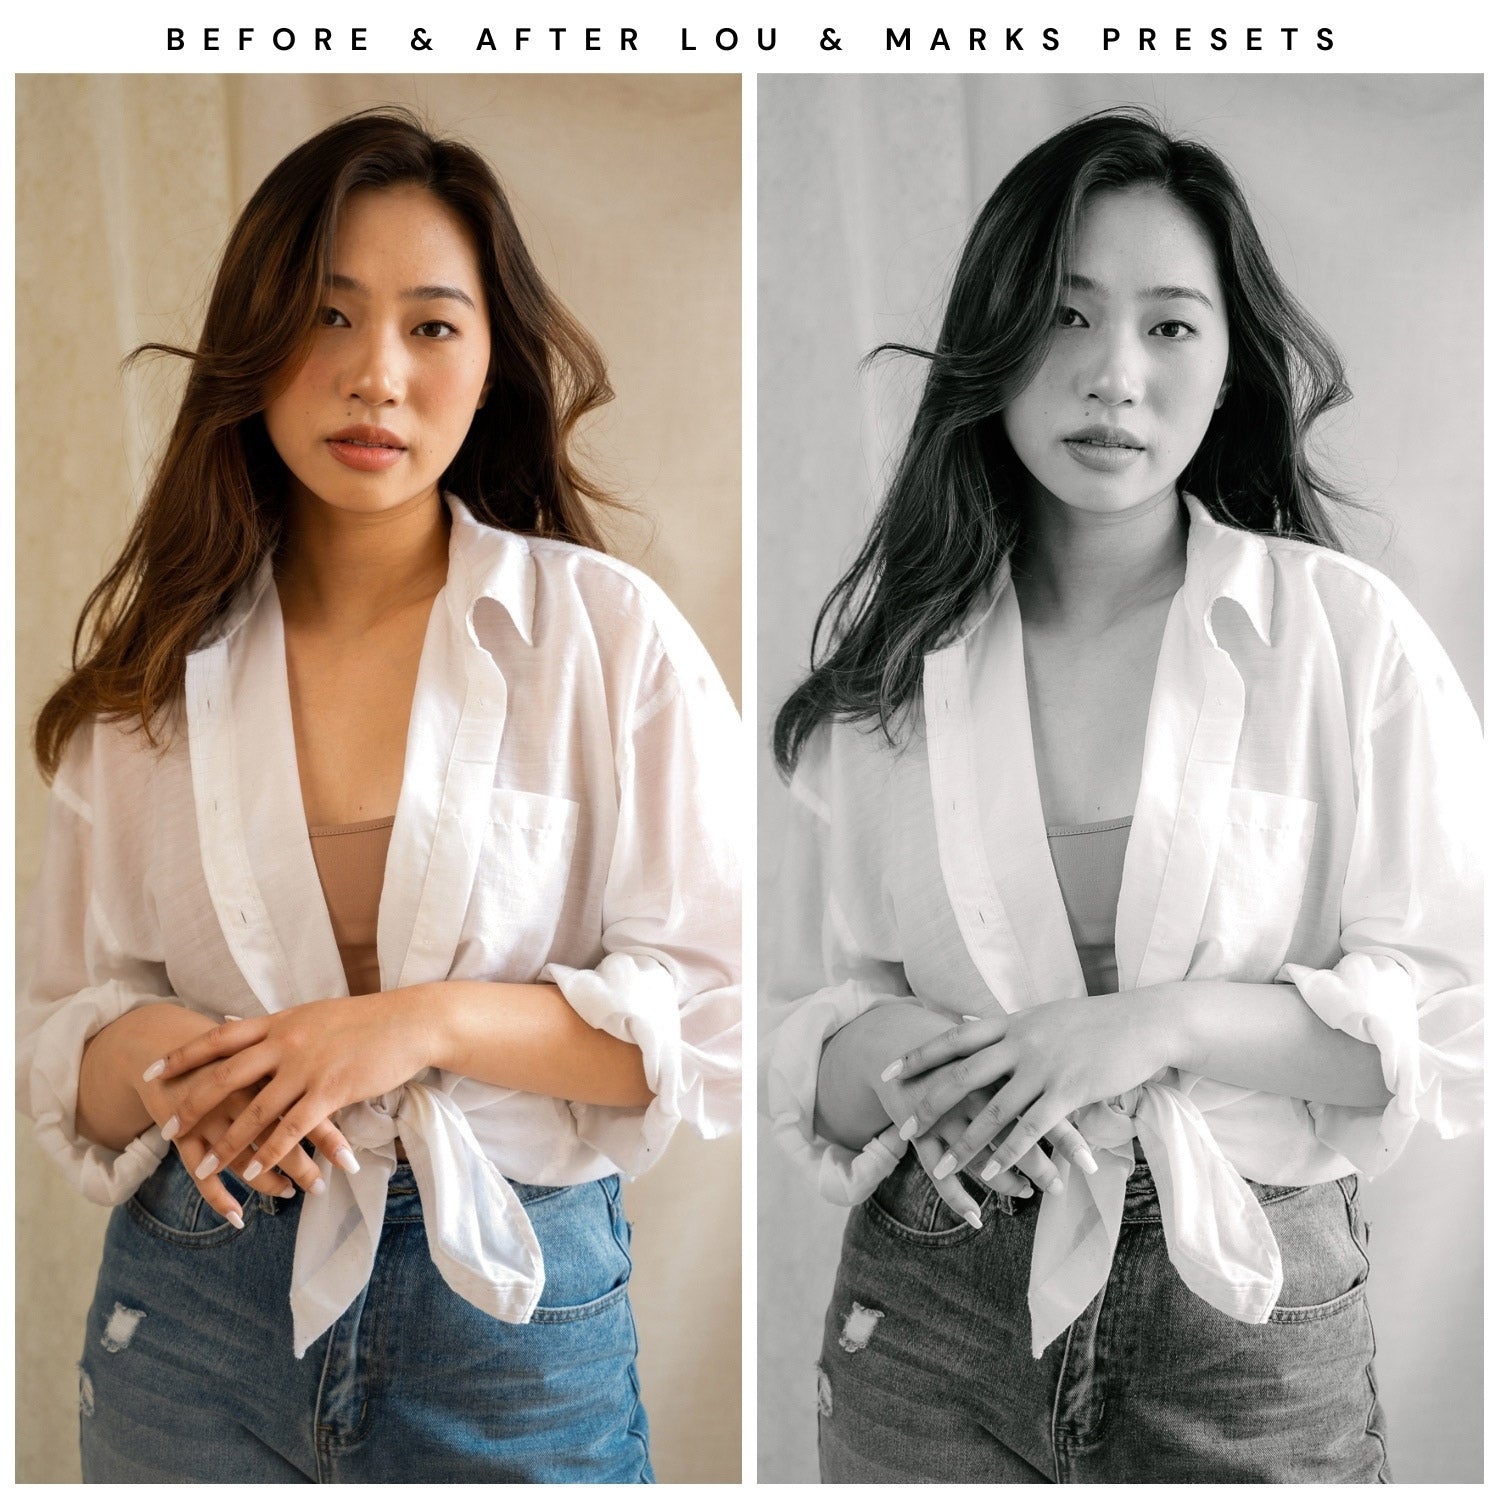 Lou & Marks Presets Light And Airy Lightroom Presets Bundle The Best Presets Black And White